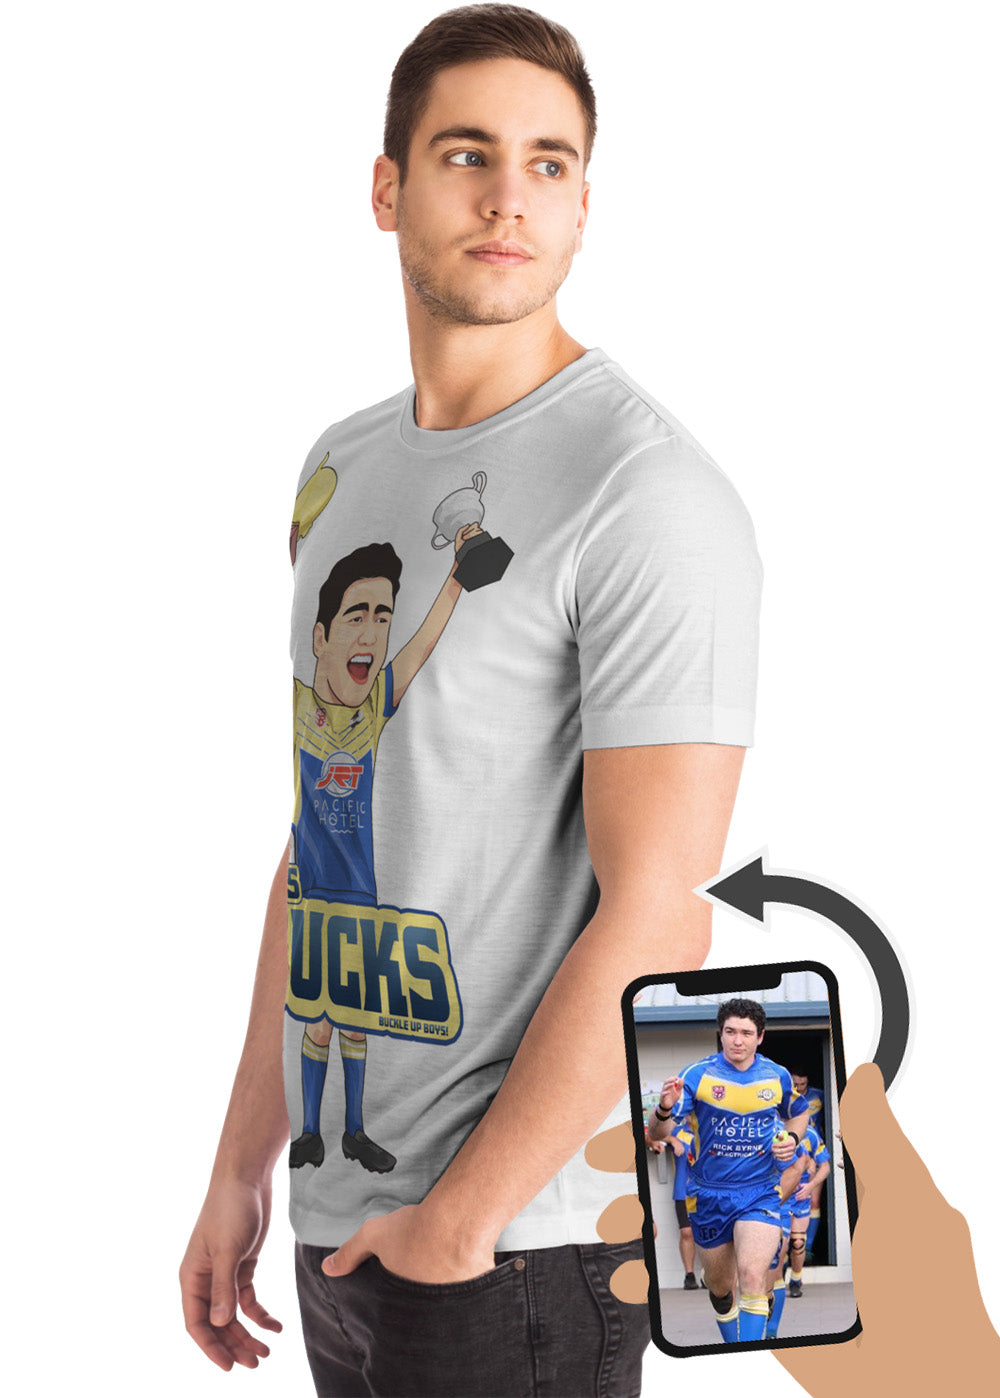 Custom Novelty Cartoon Birthday Party T-Shirt (18th, 21st, 30th, 40th, 50th etc.) (7+ Piece Min.) Mens & Women's Sizing (NEXT-DAY prod. avail. at checkout)